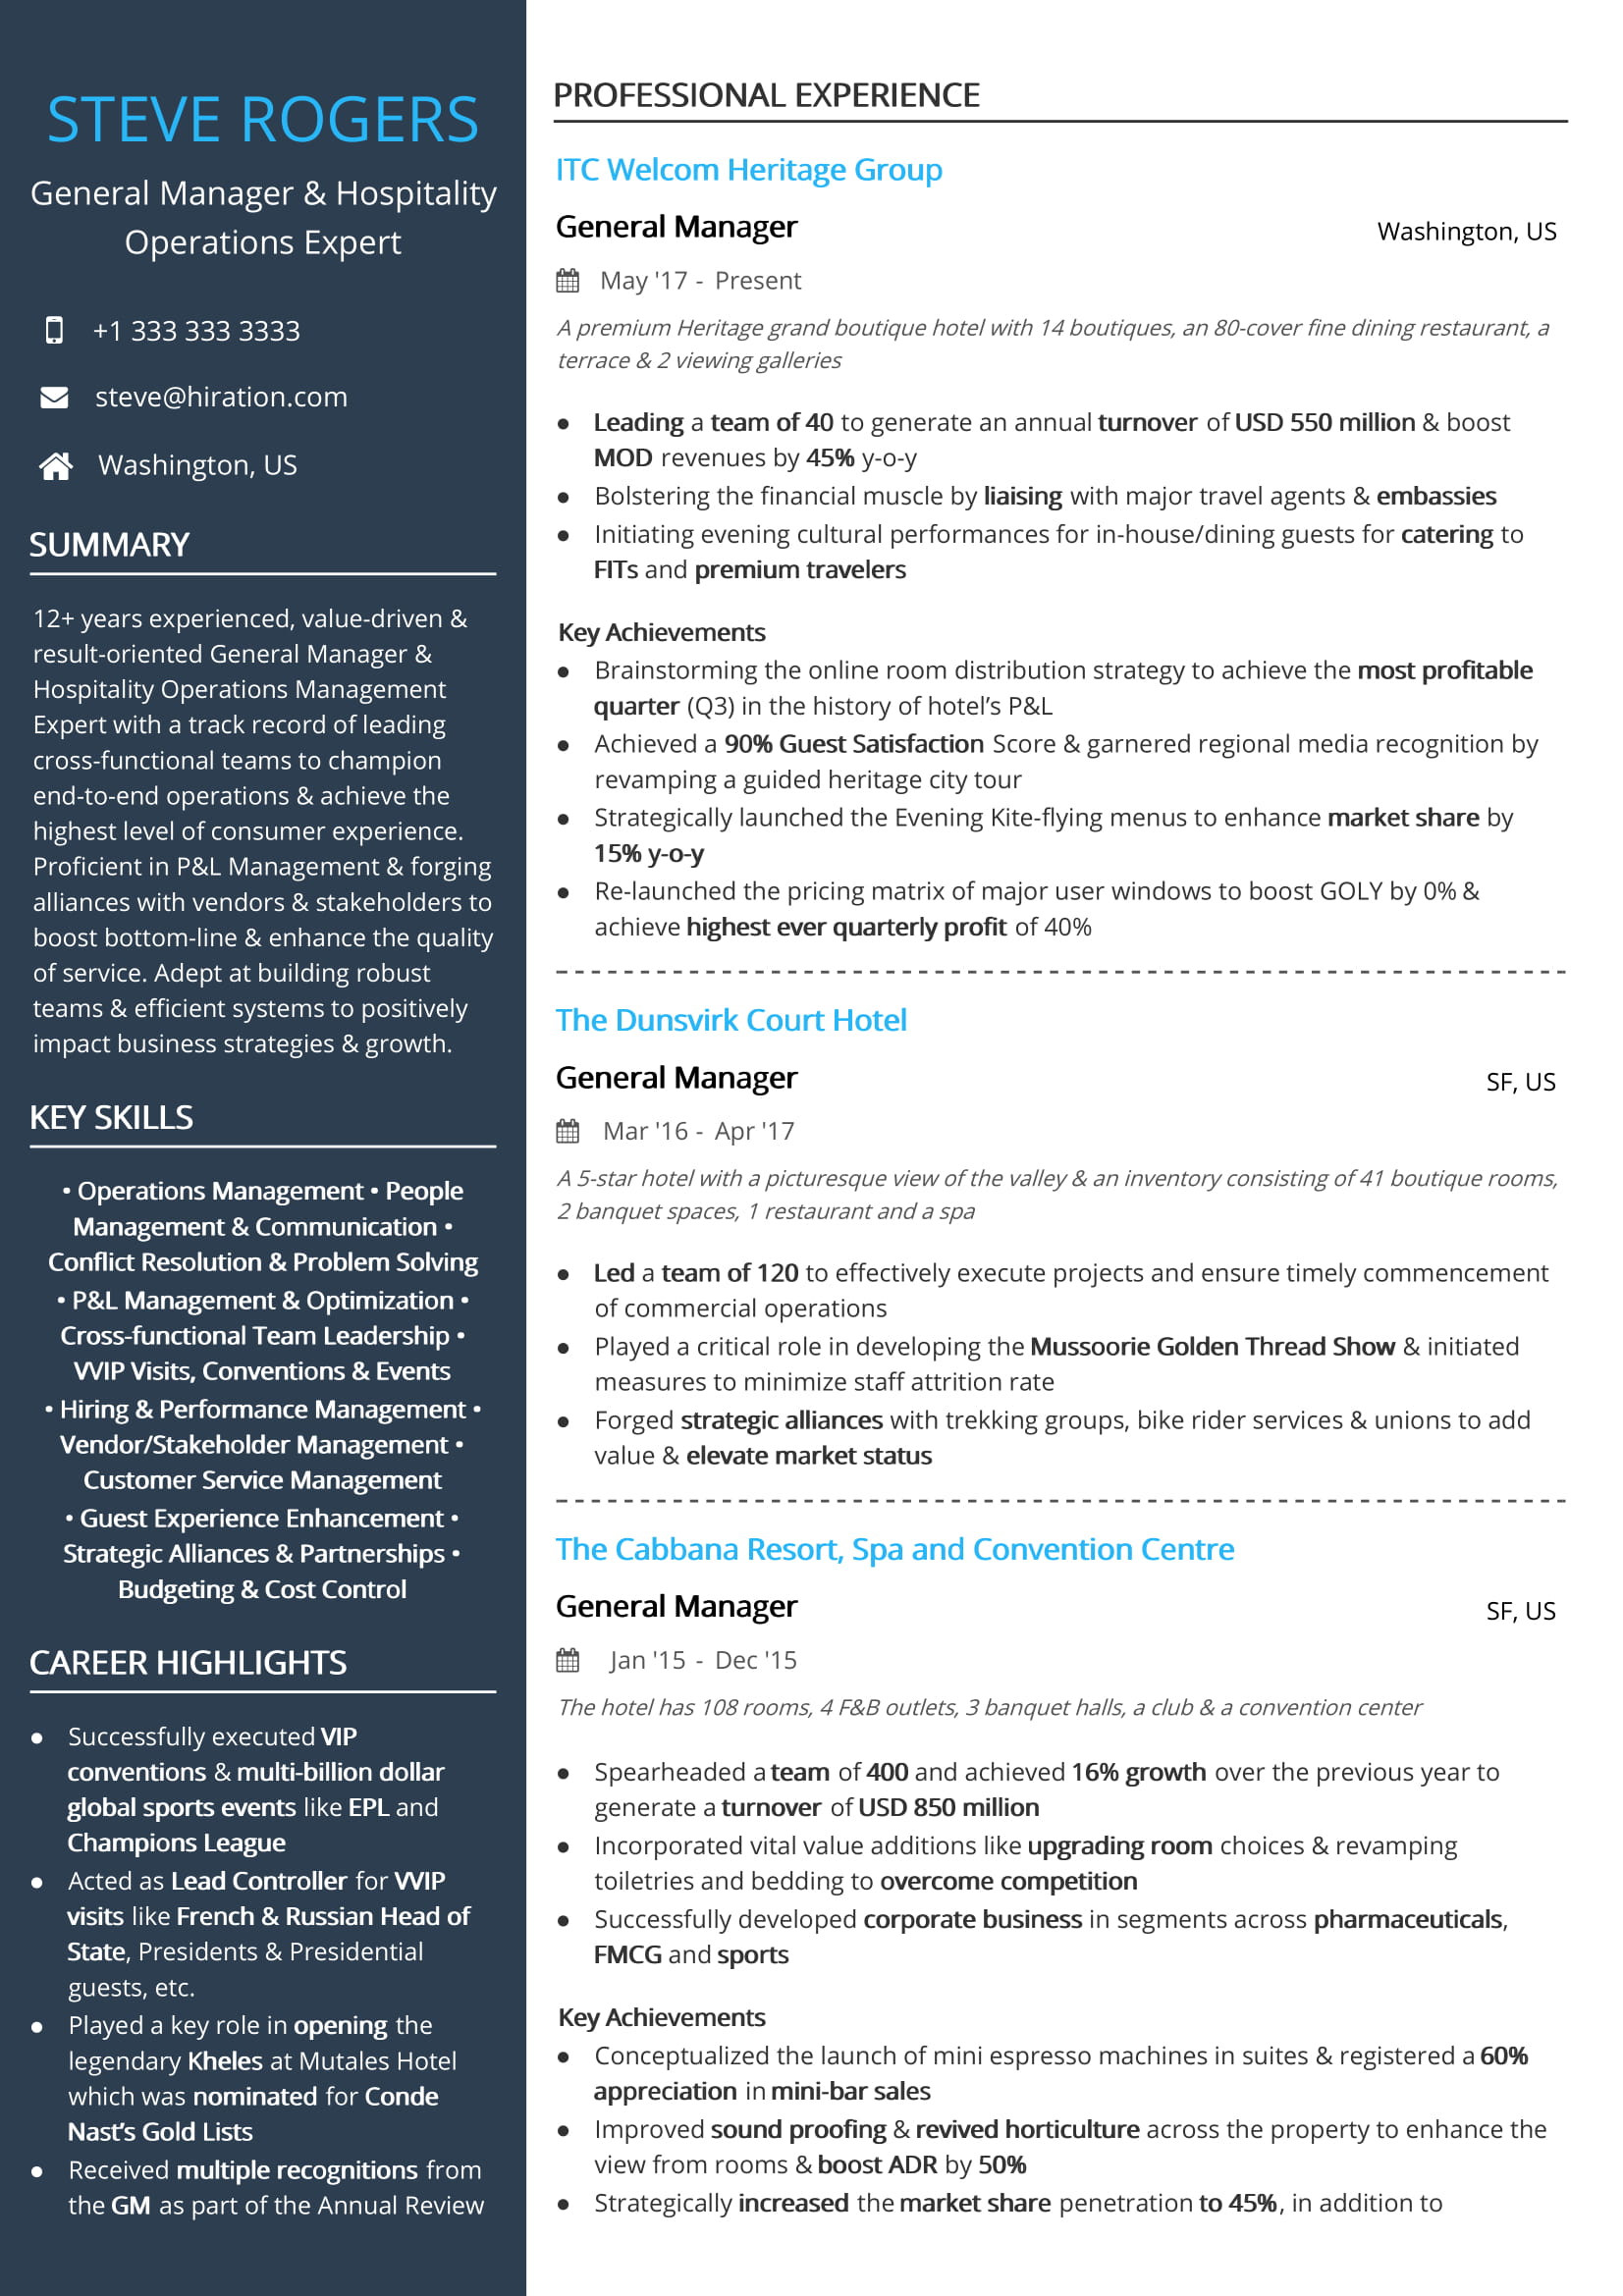 Sample Resume for General Manager Hotel Free Hospitality Operations Expert Resume Sample 2020 by Hiration